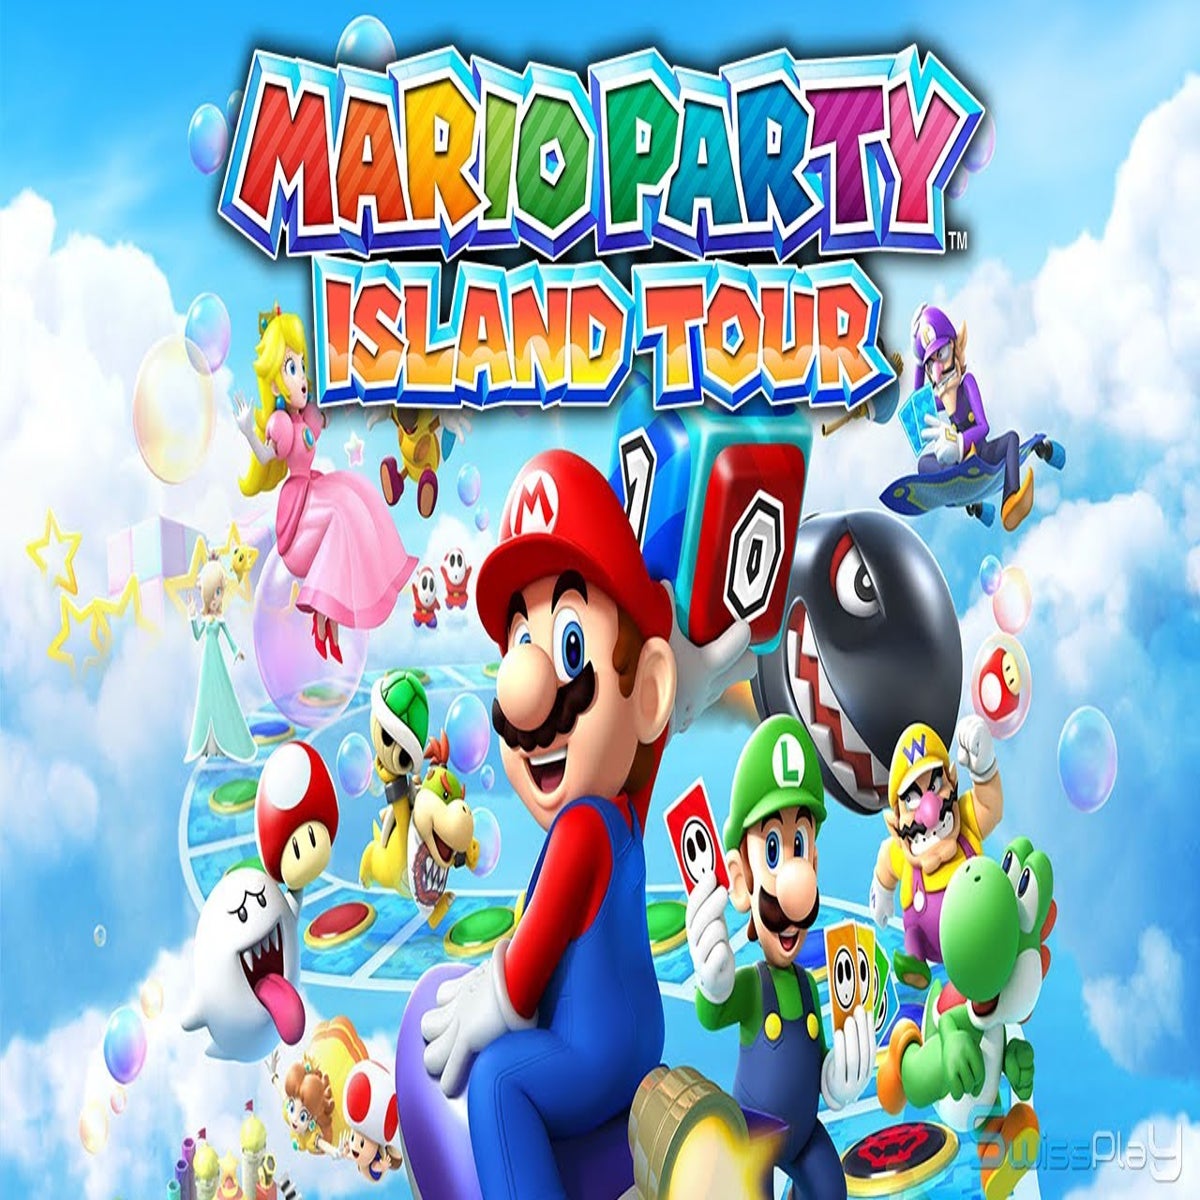 Mario Party: Island Tour for 3DS review: Mario's party isn't flagging yet | The Independent | The Independent